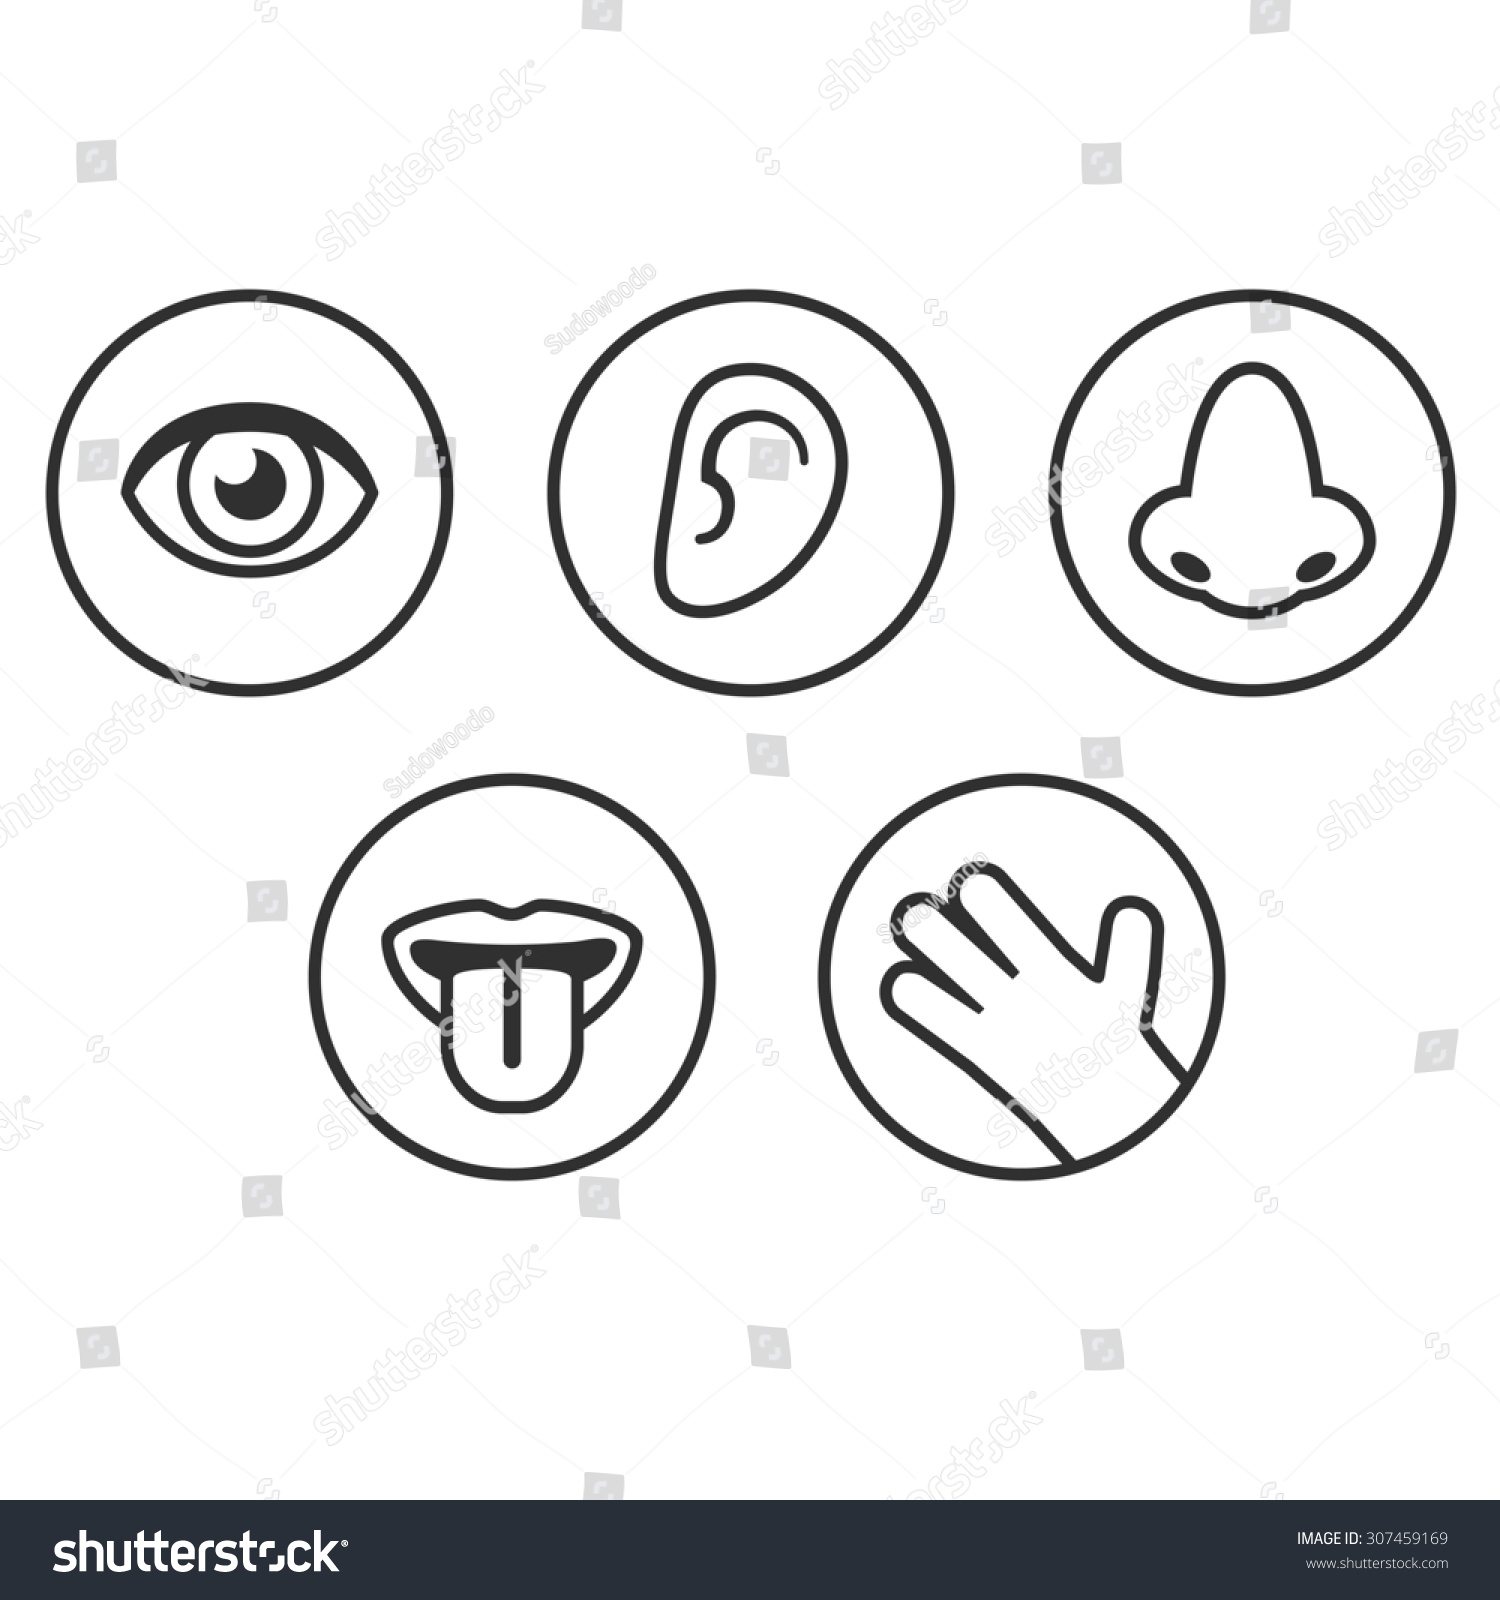 Set Of Icons Of Five Senses: Sight, Smell, Hearing, Touch, Taste. Stock ...